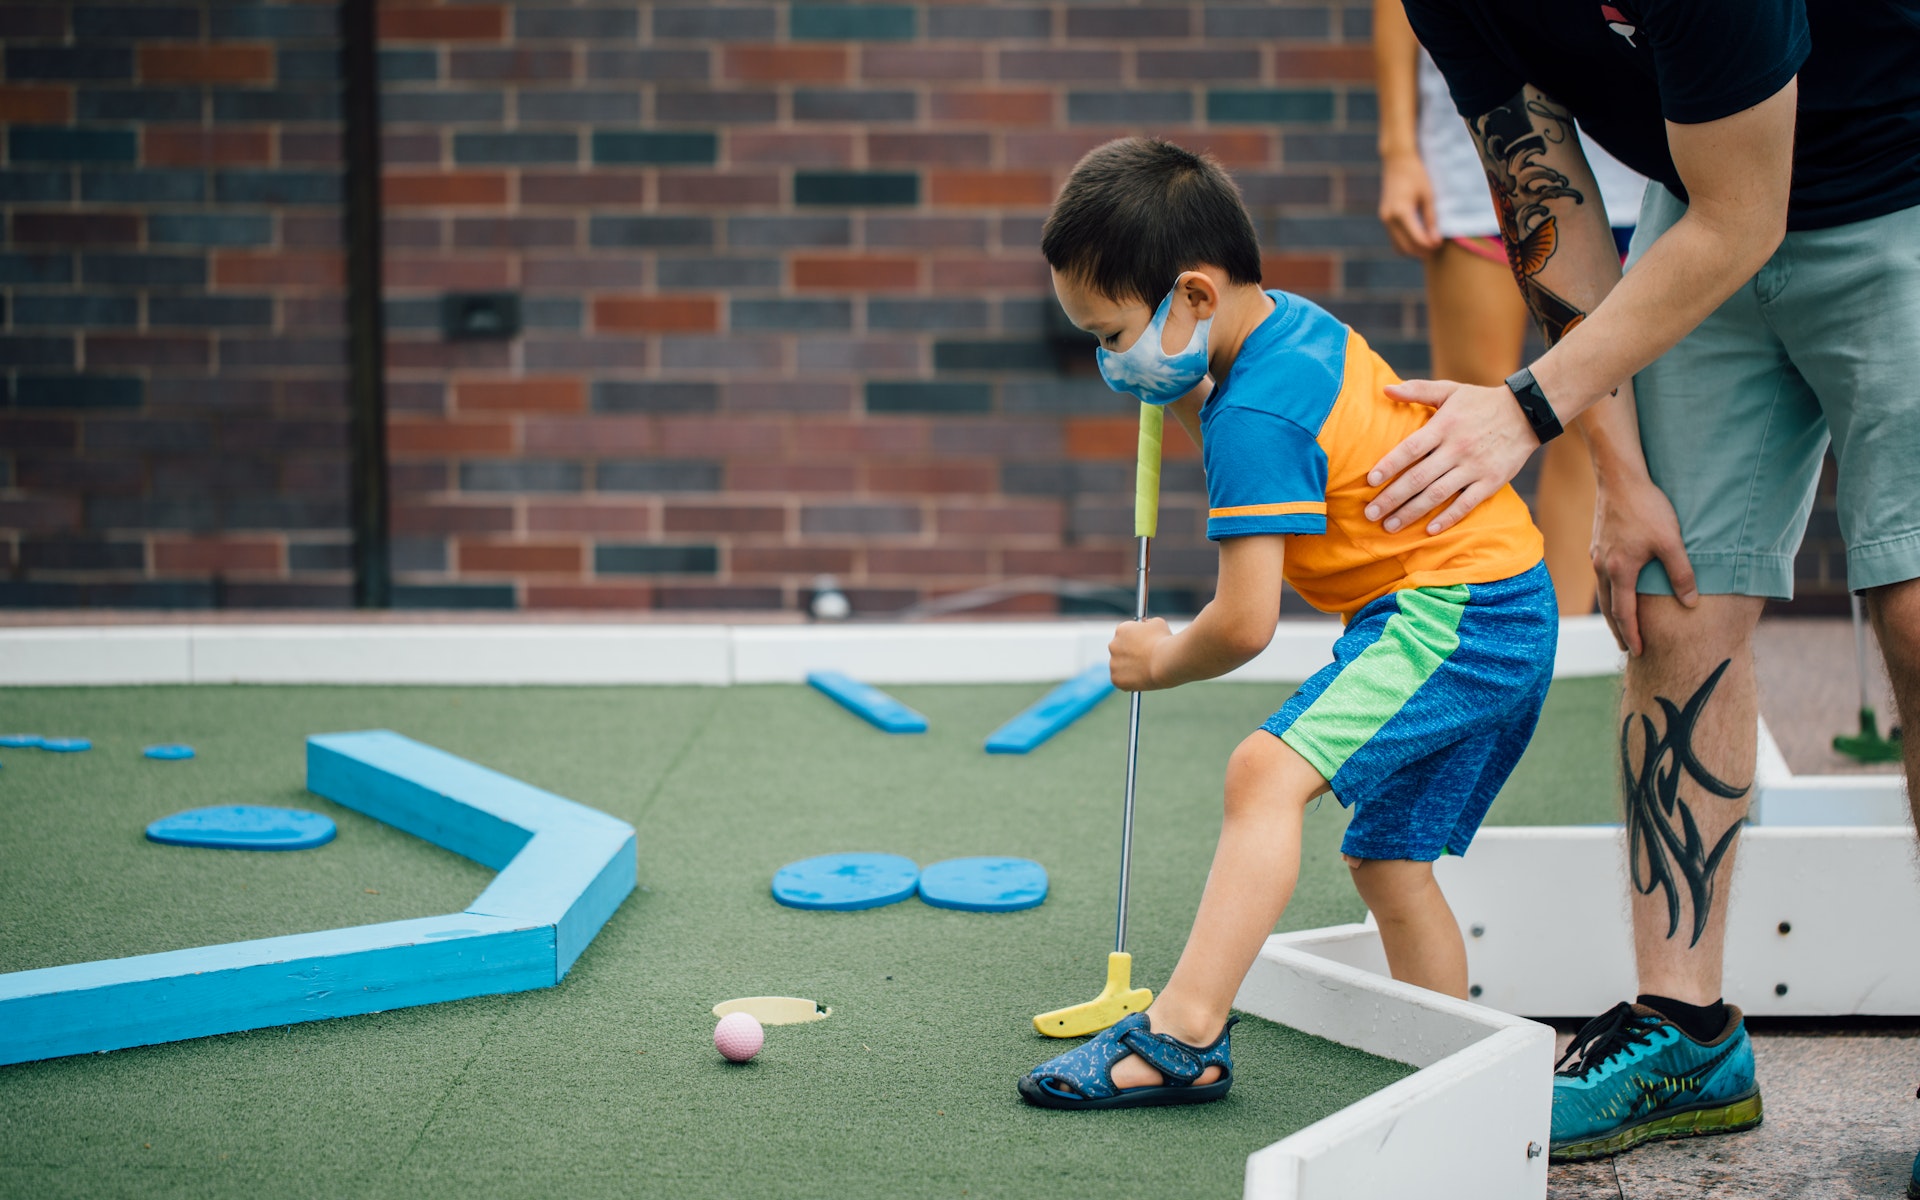 A young boy plays Skyline Mini Golf with the help of an adult.